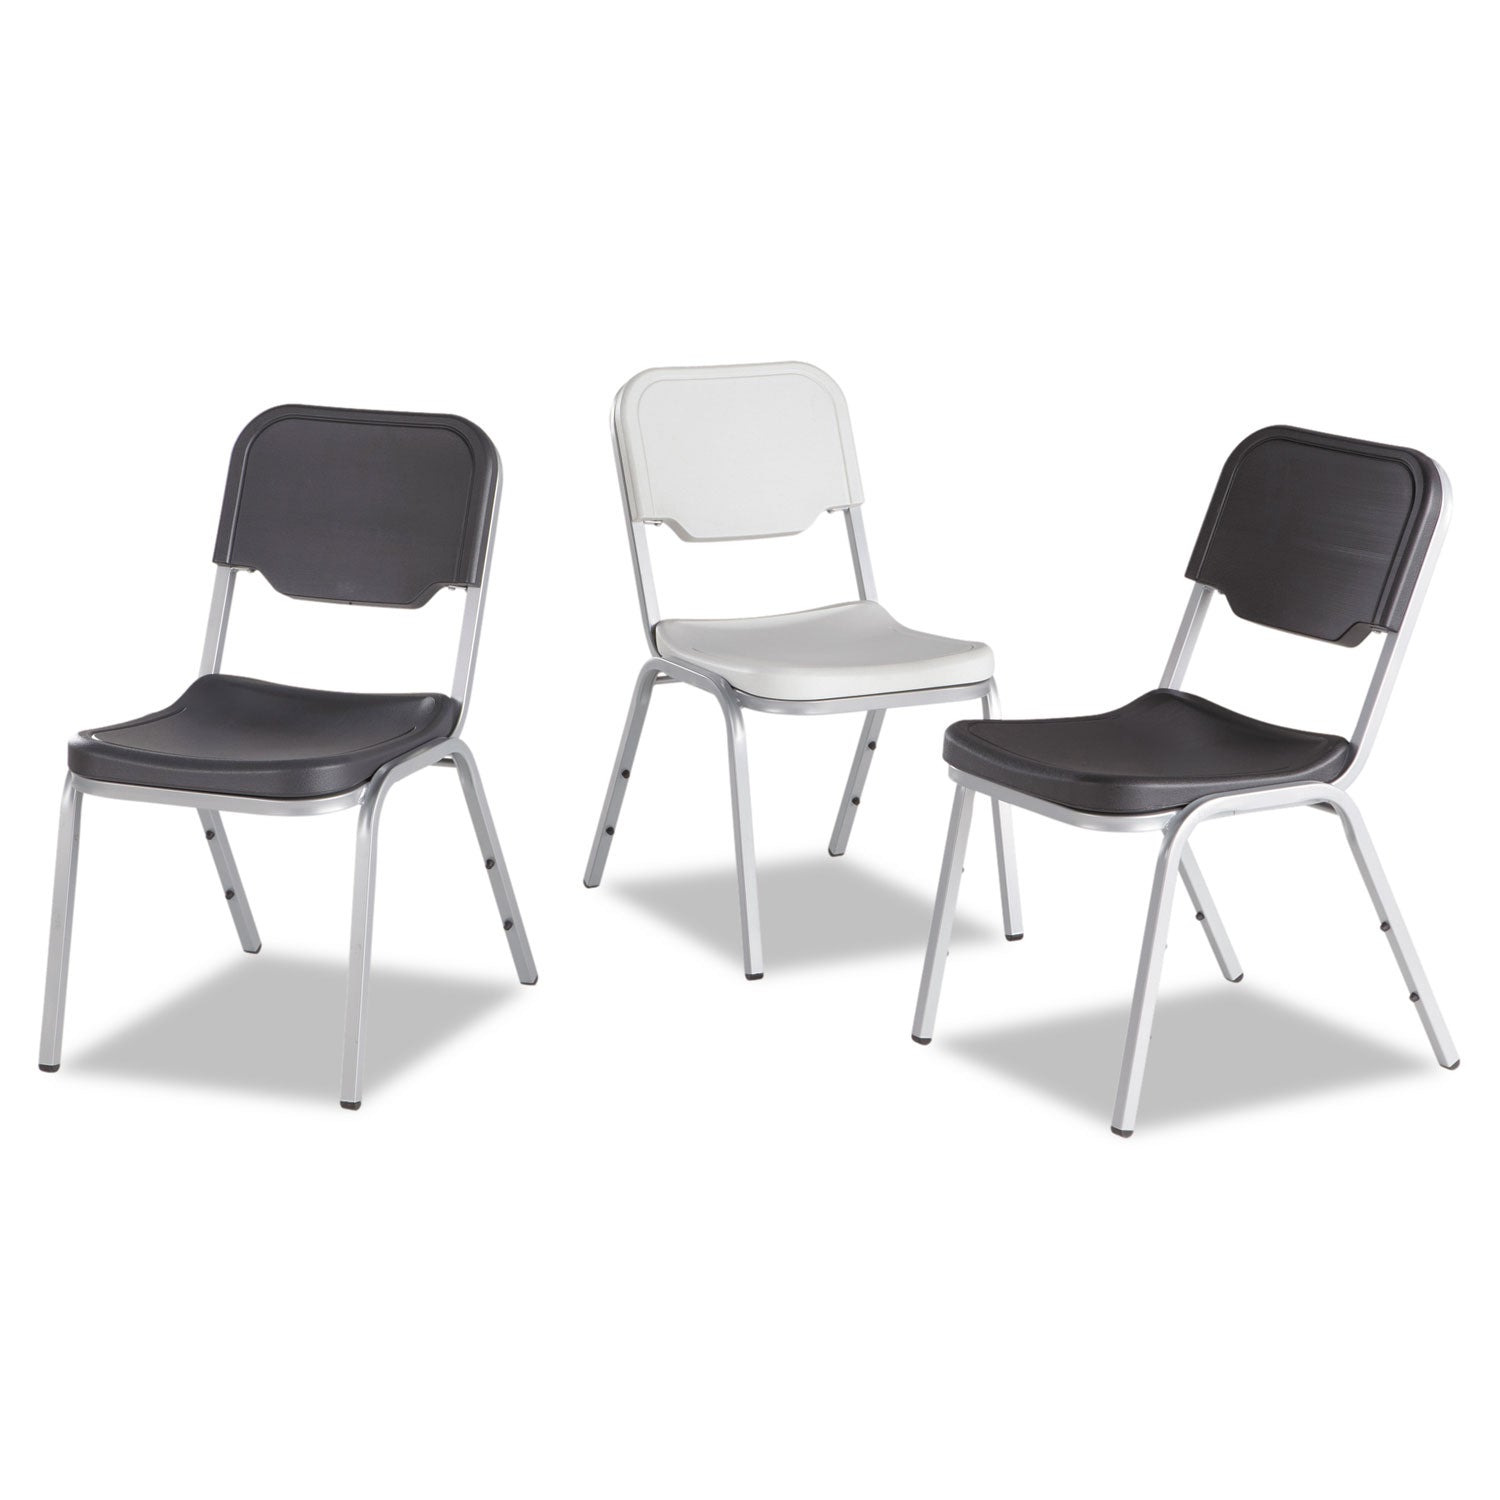 Rough n Ready Stack Chair, Supports Up to 500 lb, 17.5" Seat Height, Black Seat, Black Back, Silver Base, 4/Carton - 